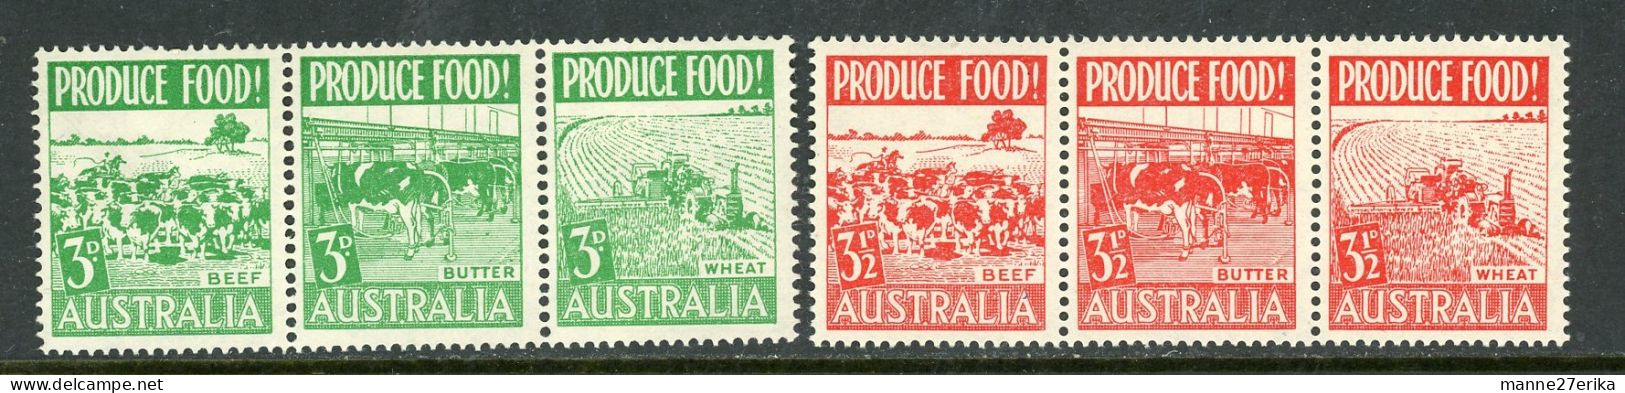 Australia MH  1953 Produce Food - Mint Stamps